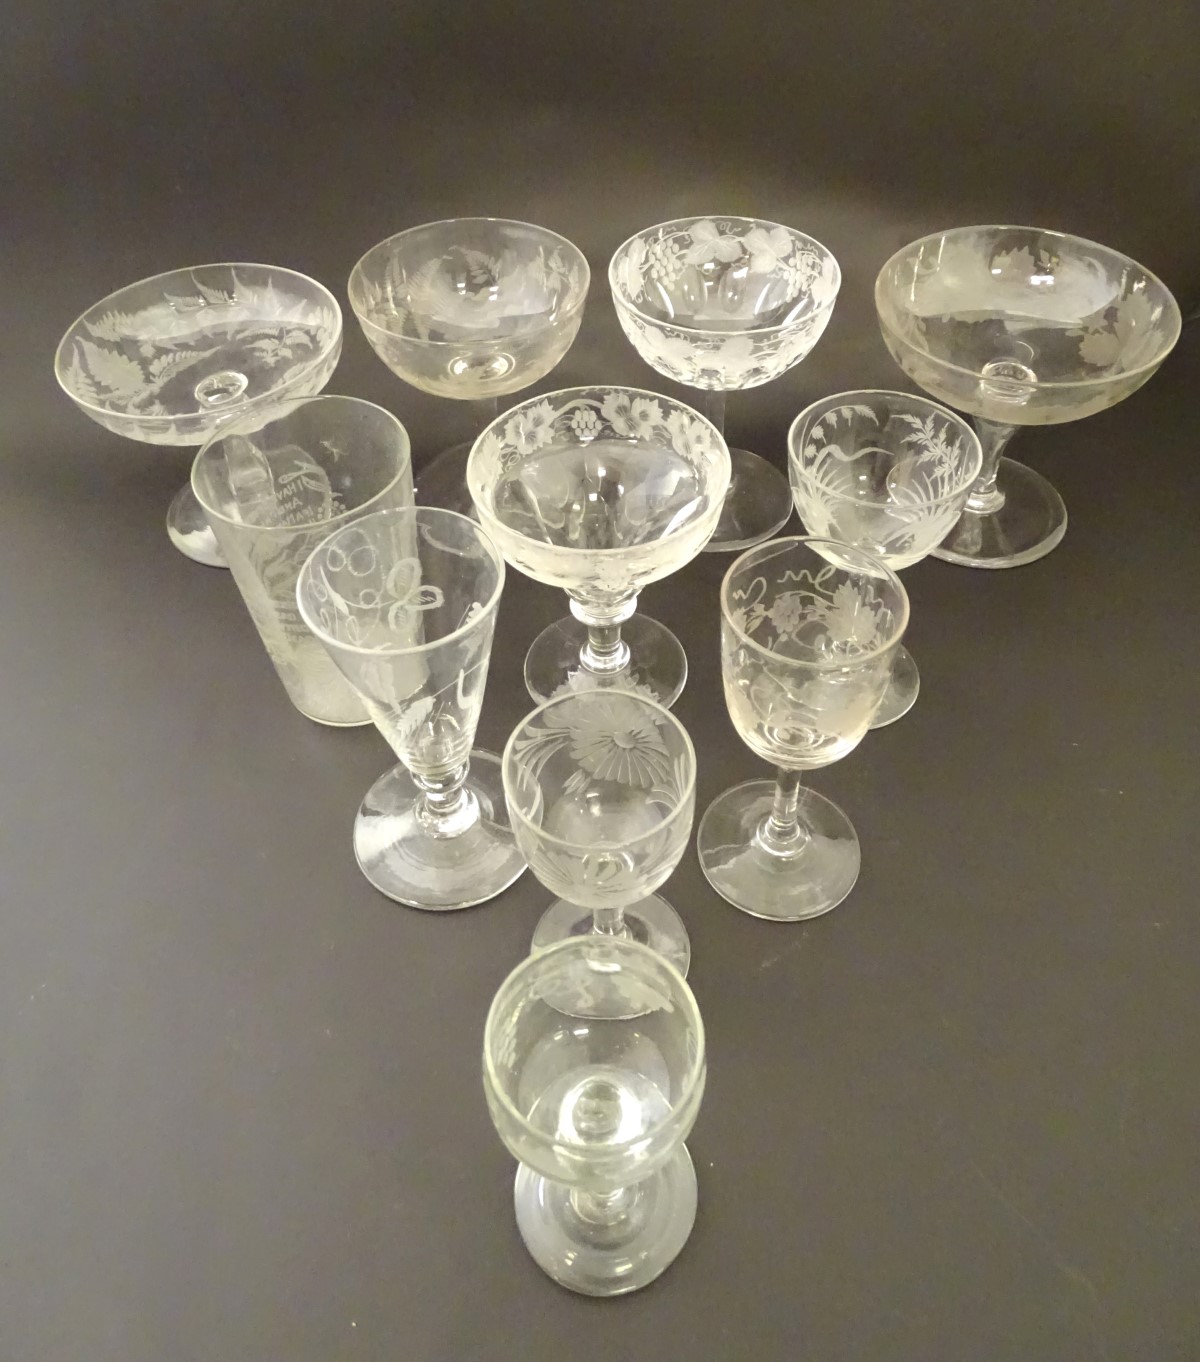 Assorted 19thC / early 20thC glassware including pedestal glasses with etched decoration etc